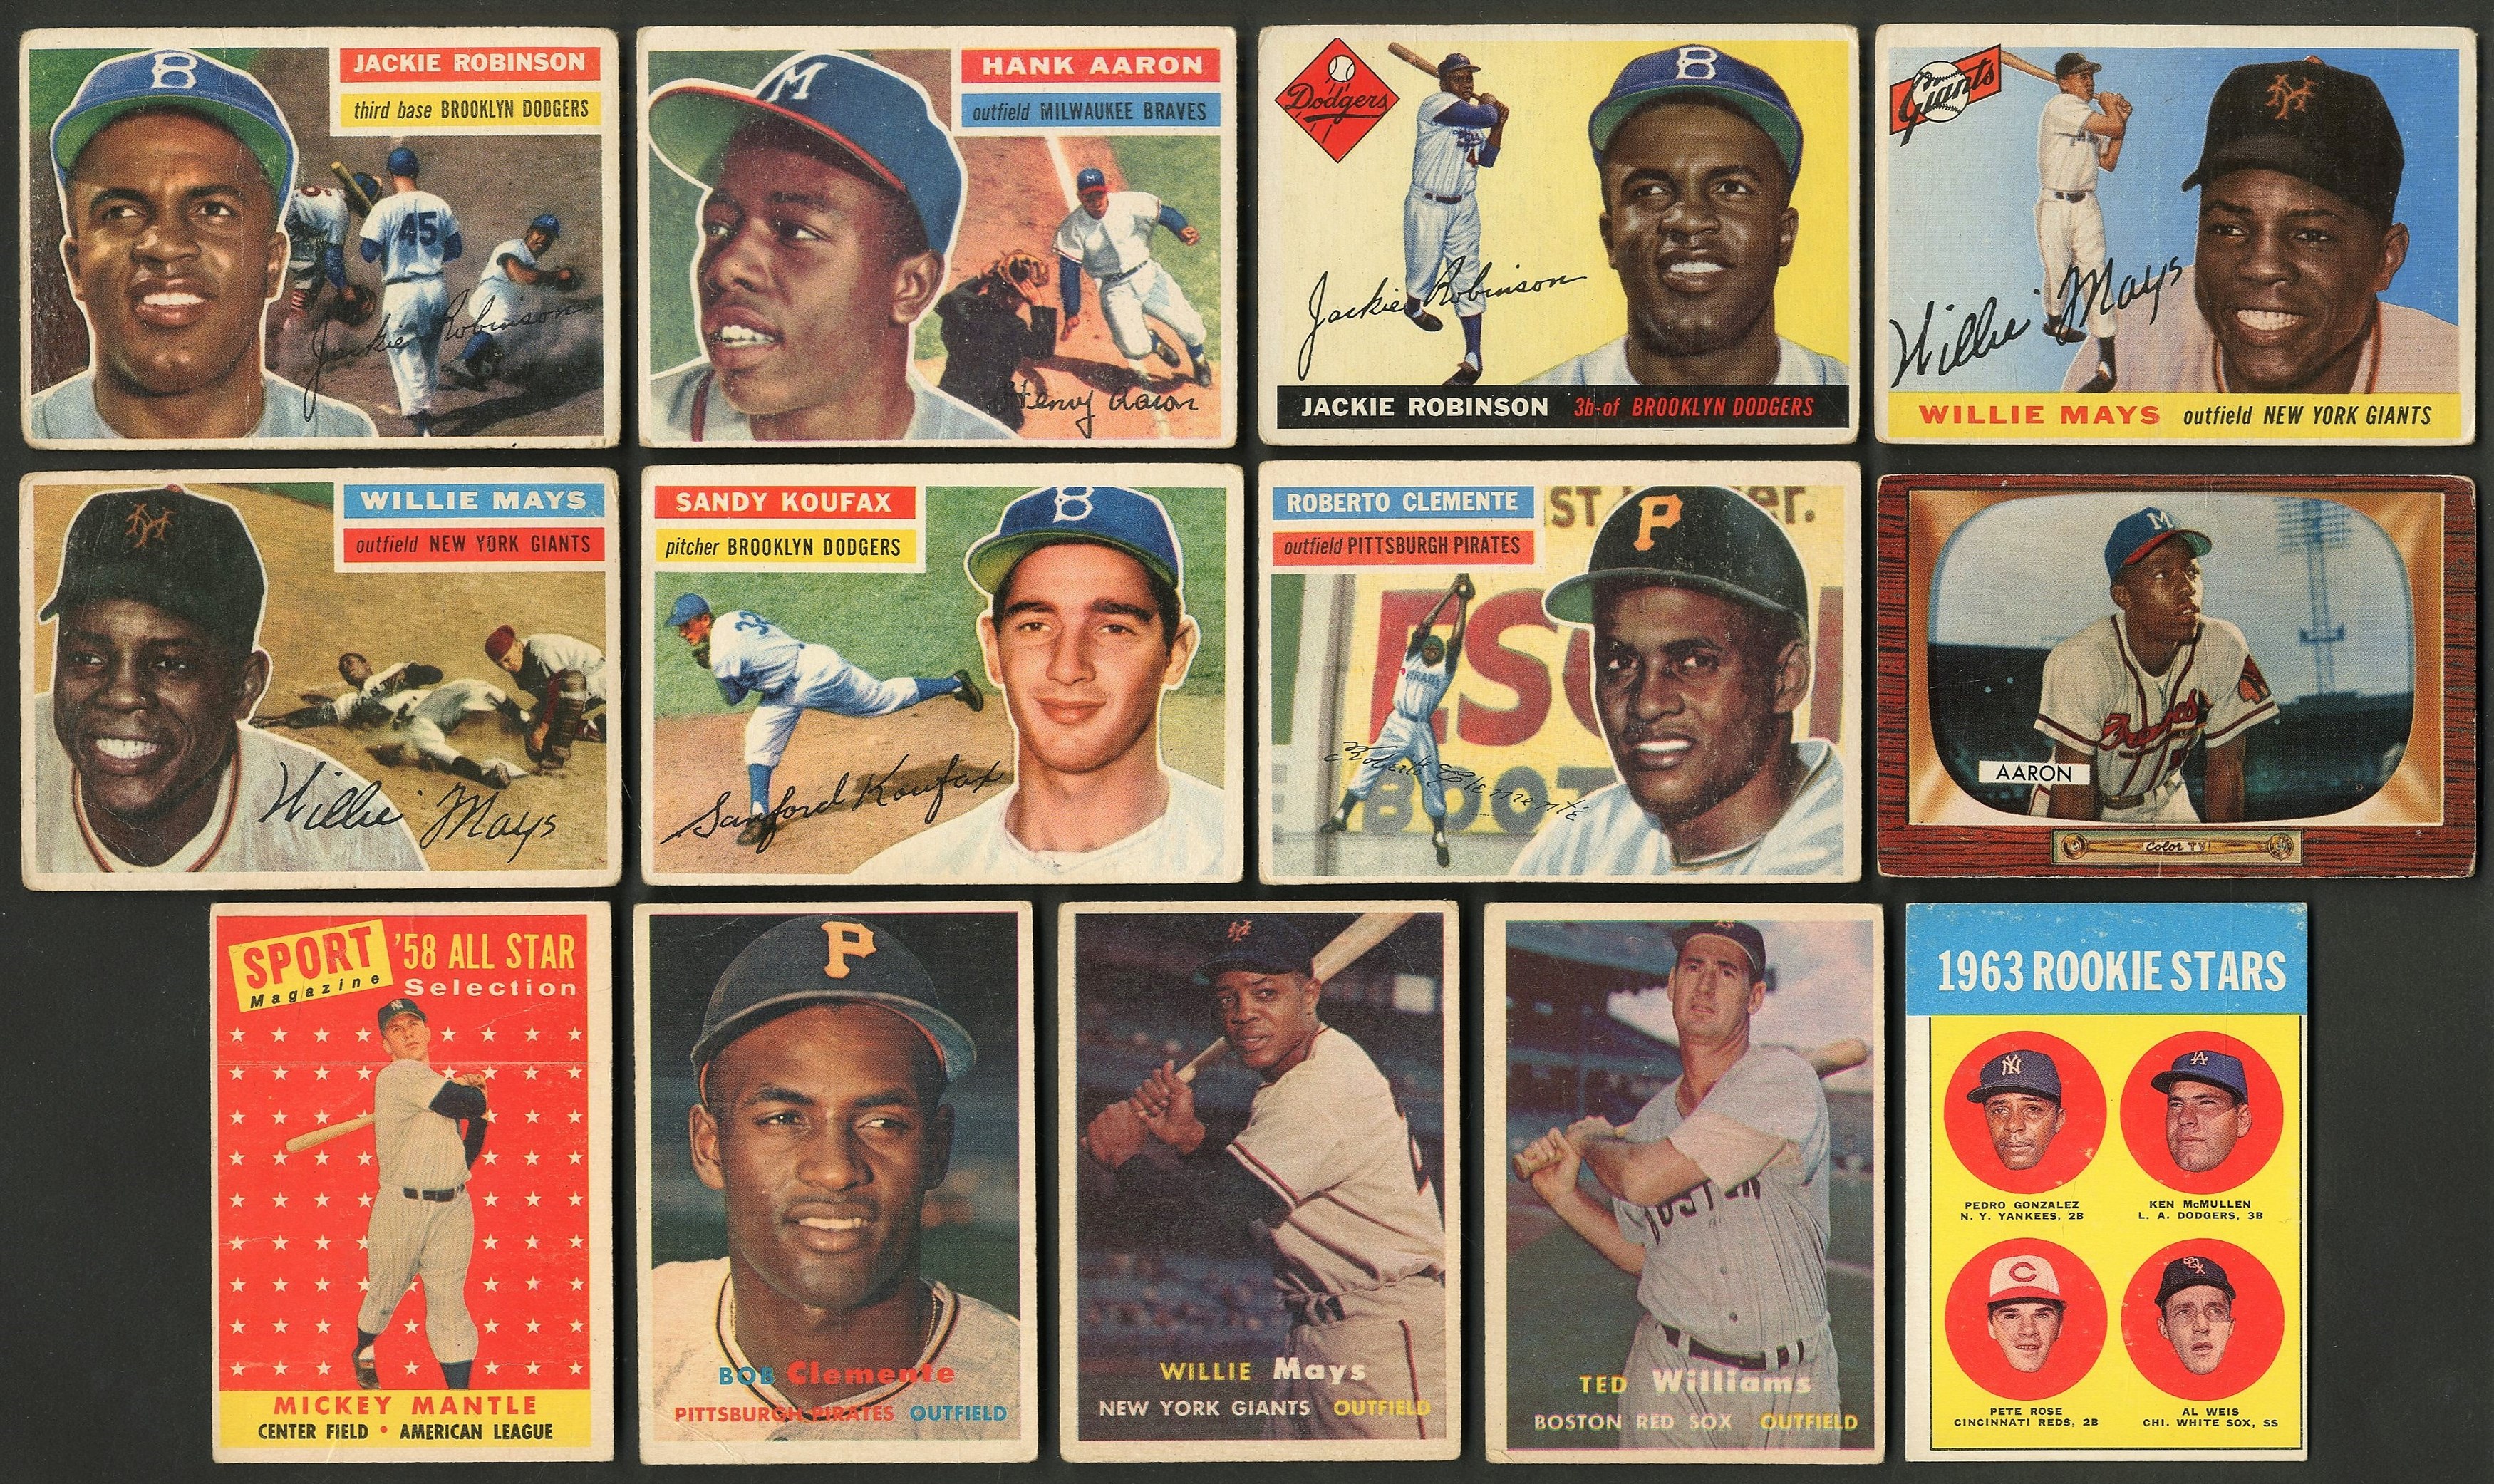 Baseball and Trading Cards - 1950s-60s Topps & Bowman Hall of Famer Collection - (4) Mantle, (5) Clemente, (8) Mays, (7) Koufax, (4) Aaron (230+)